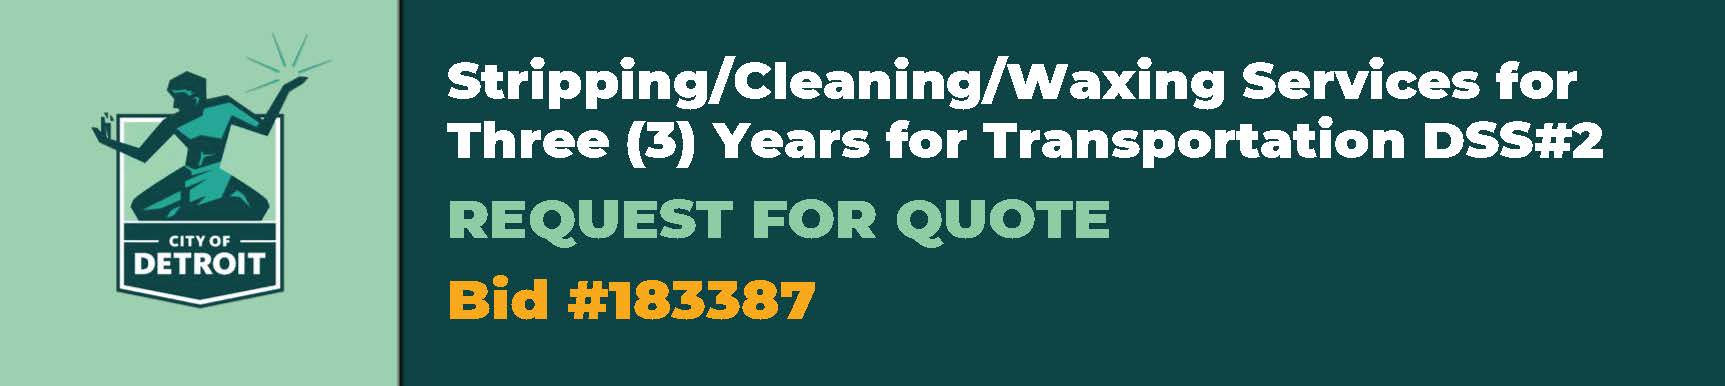 Stripping/Cleaning/Waxing Services for Three (3) Years for Transportation DSS#2